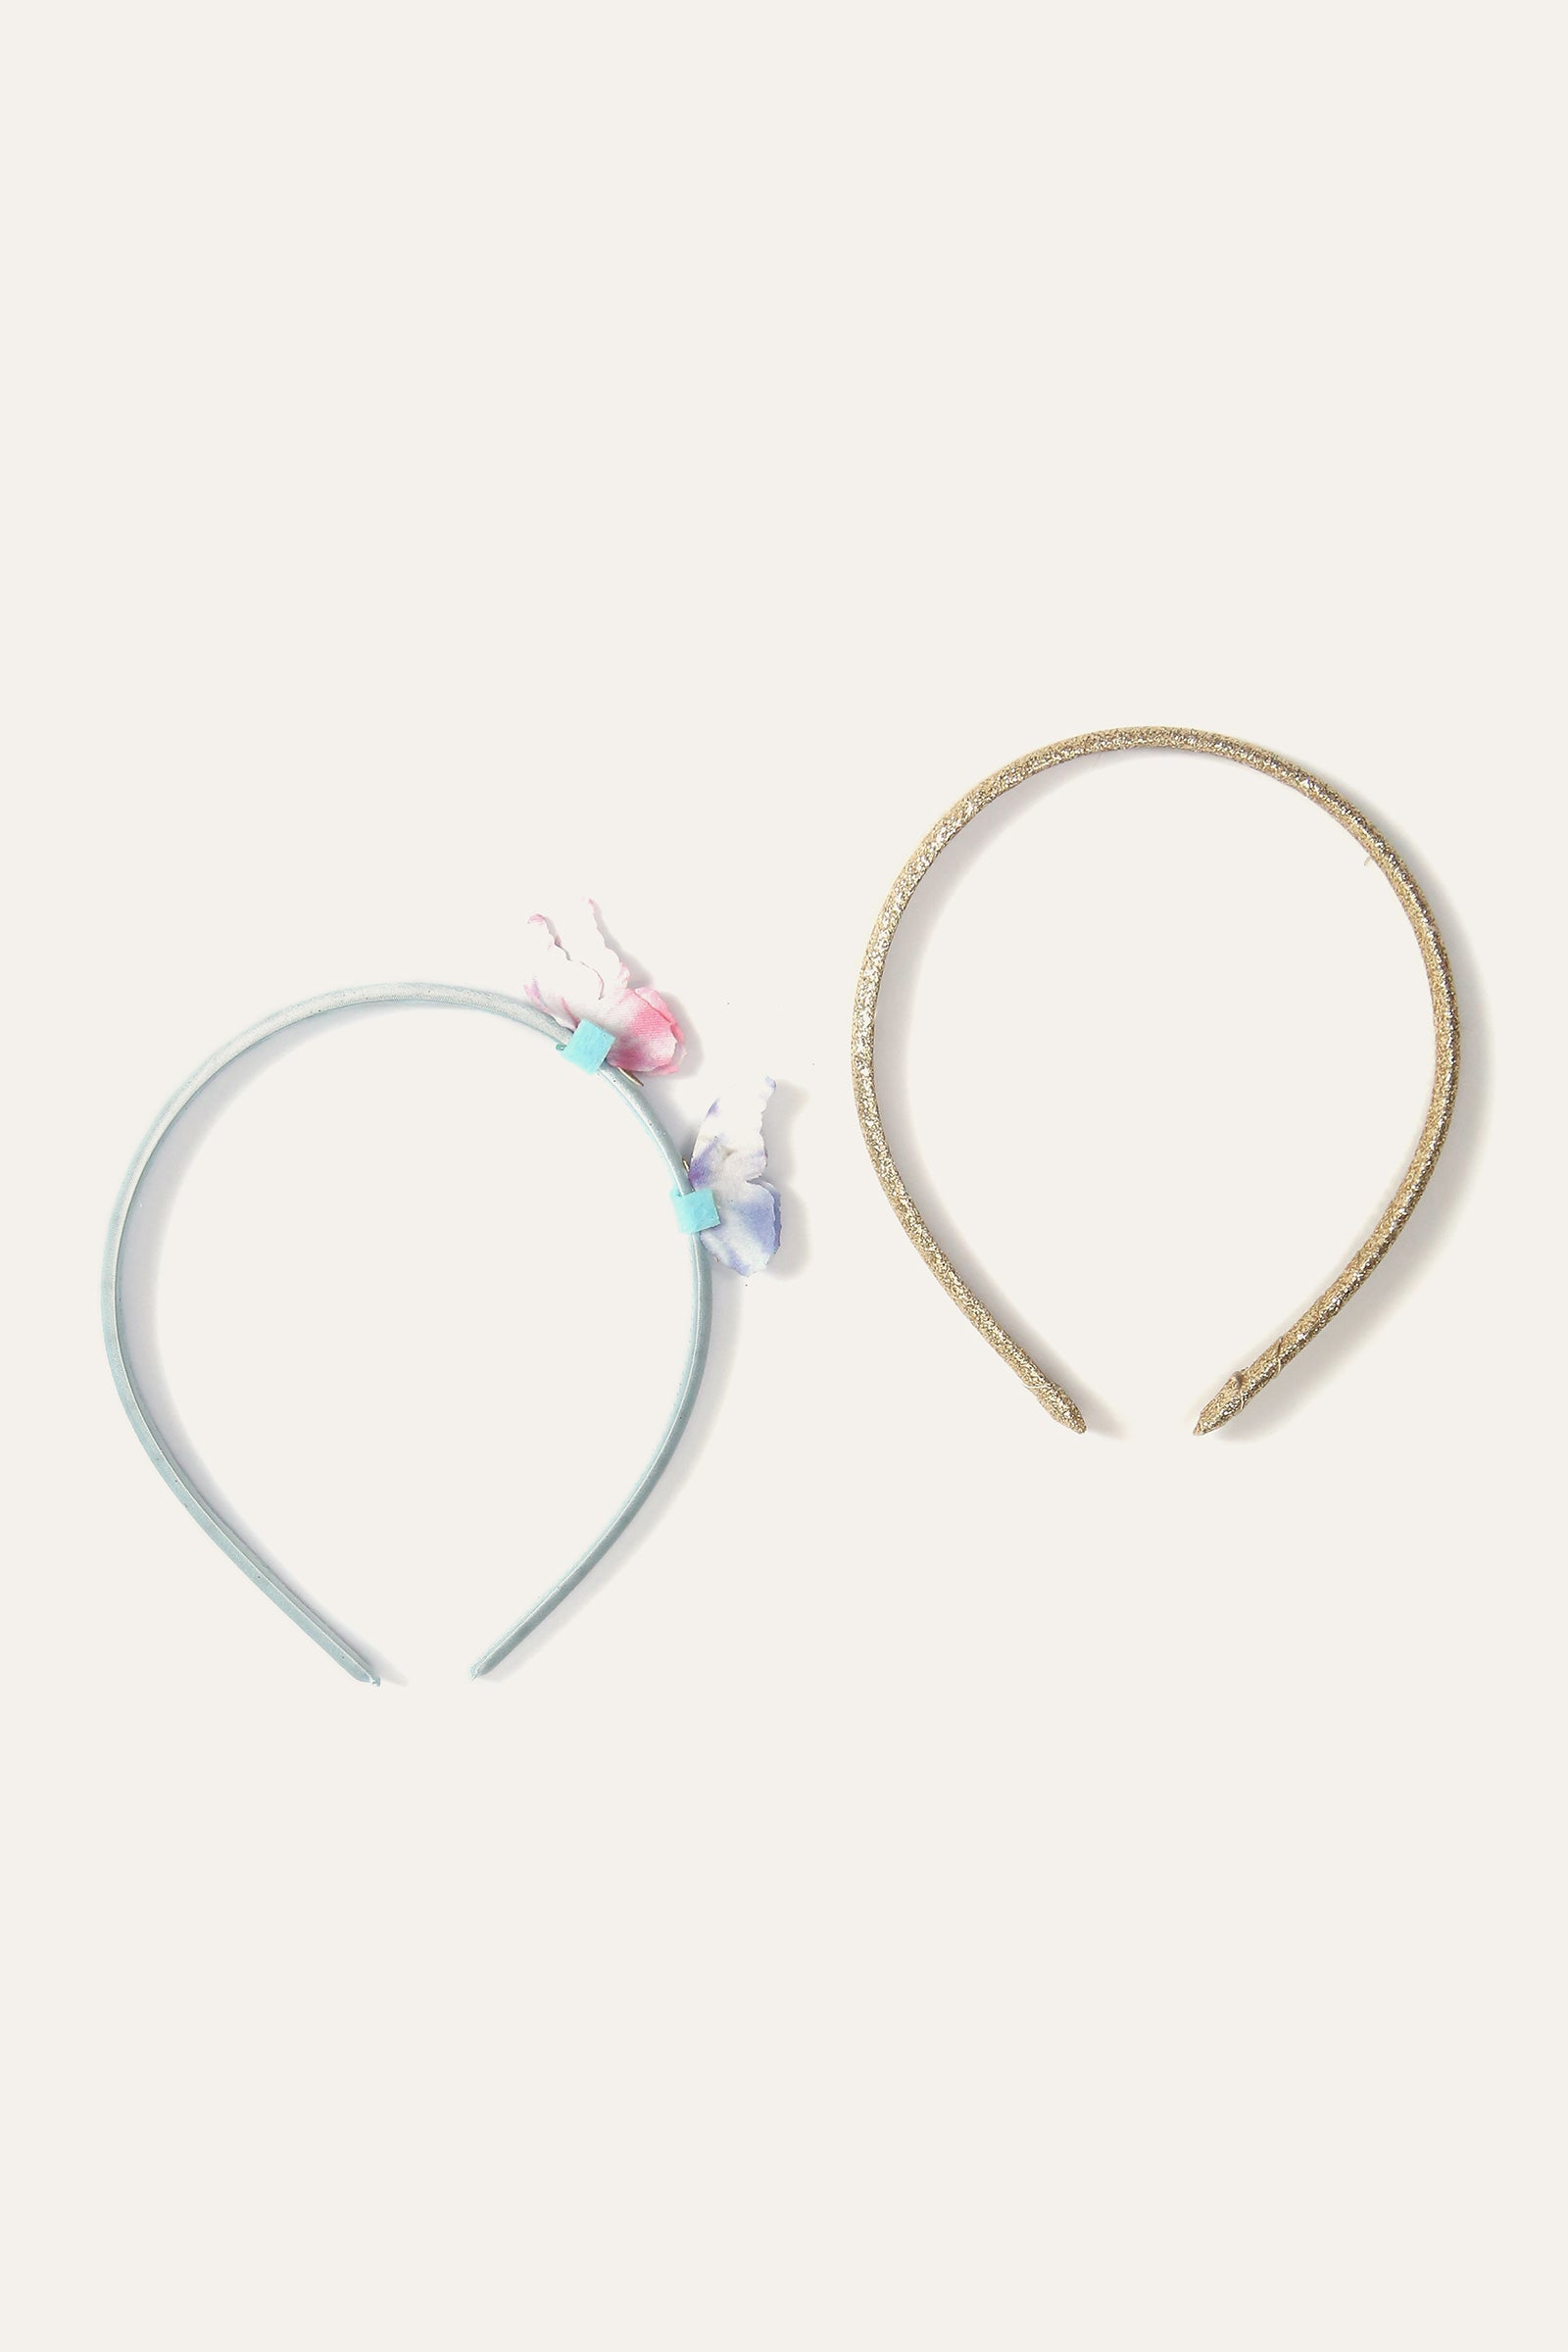 HEAD BAND (PACK OF 2) (GHB-354R)